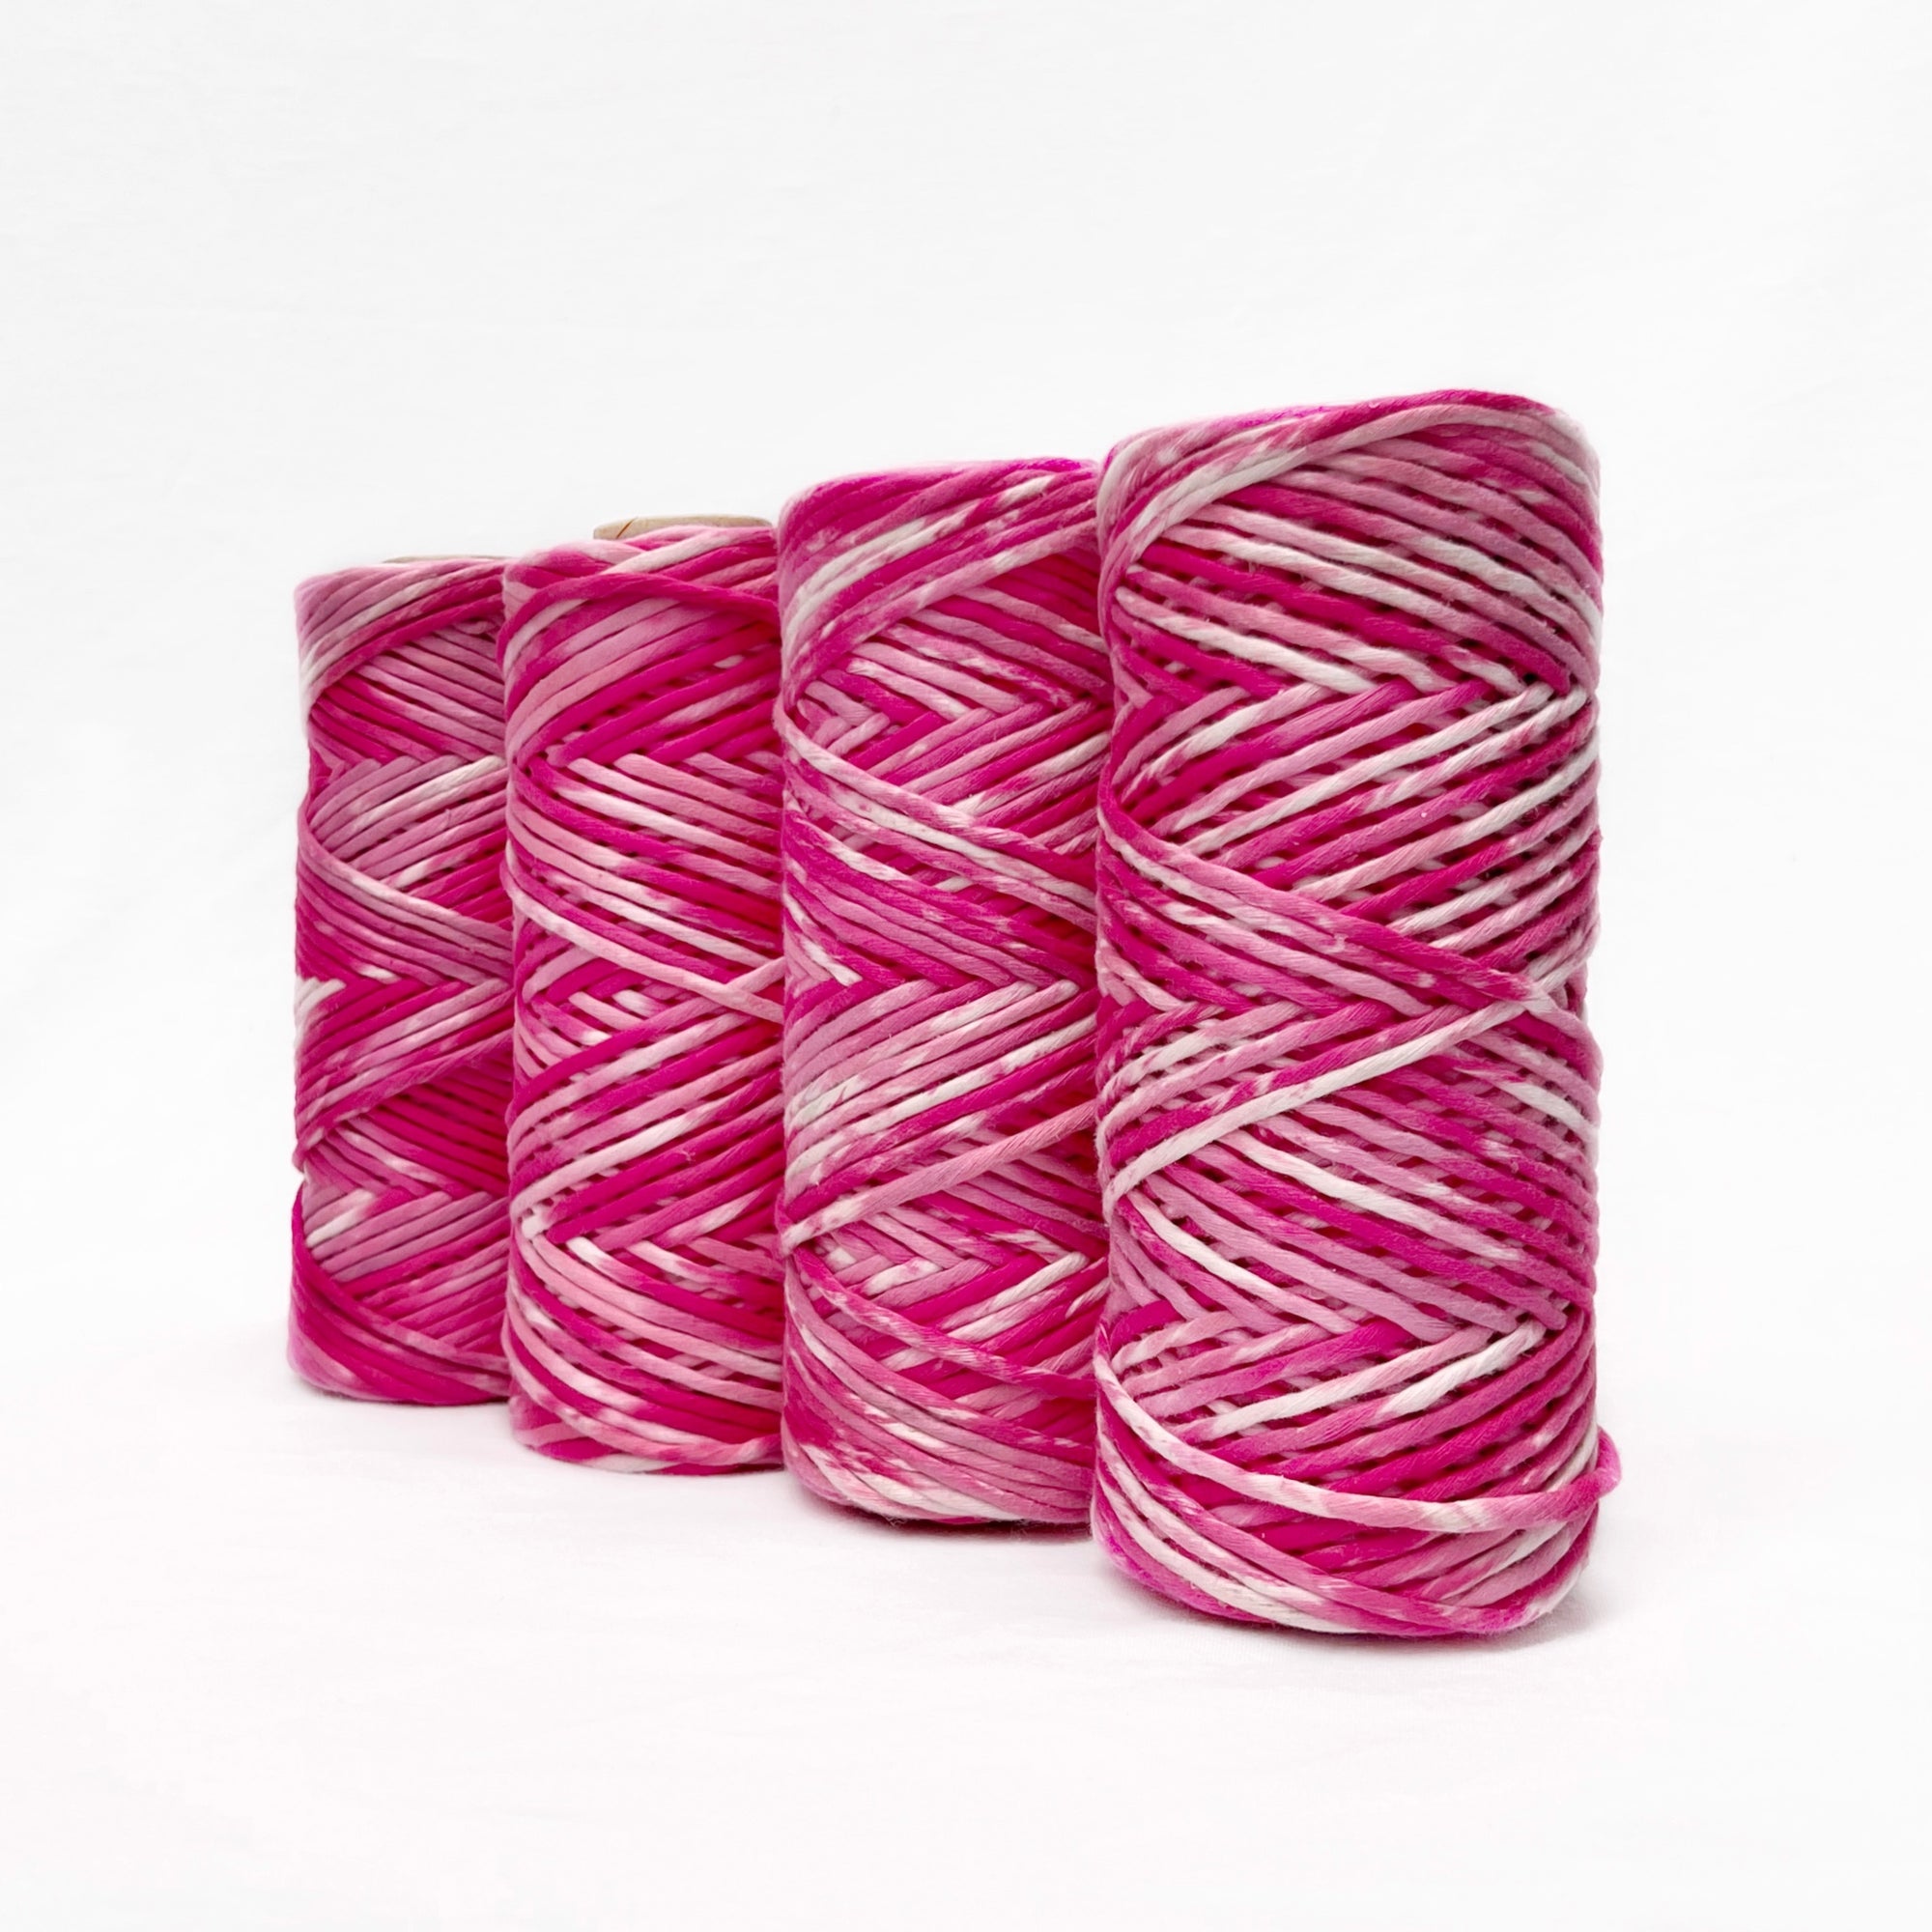 Hand Painted Macrame String // Lipstick Pink